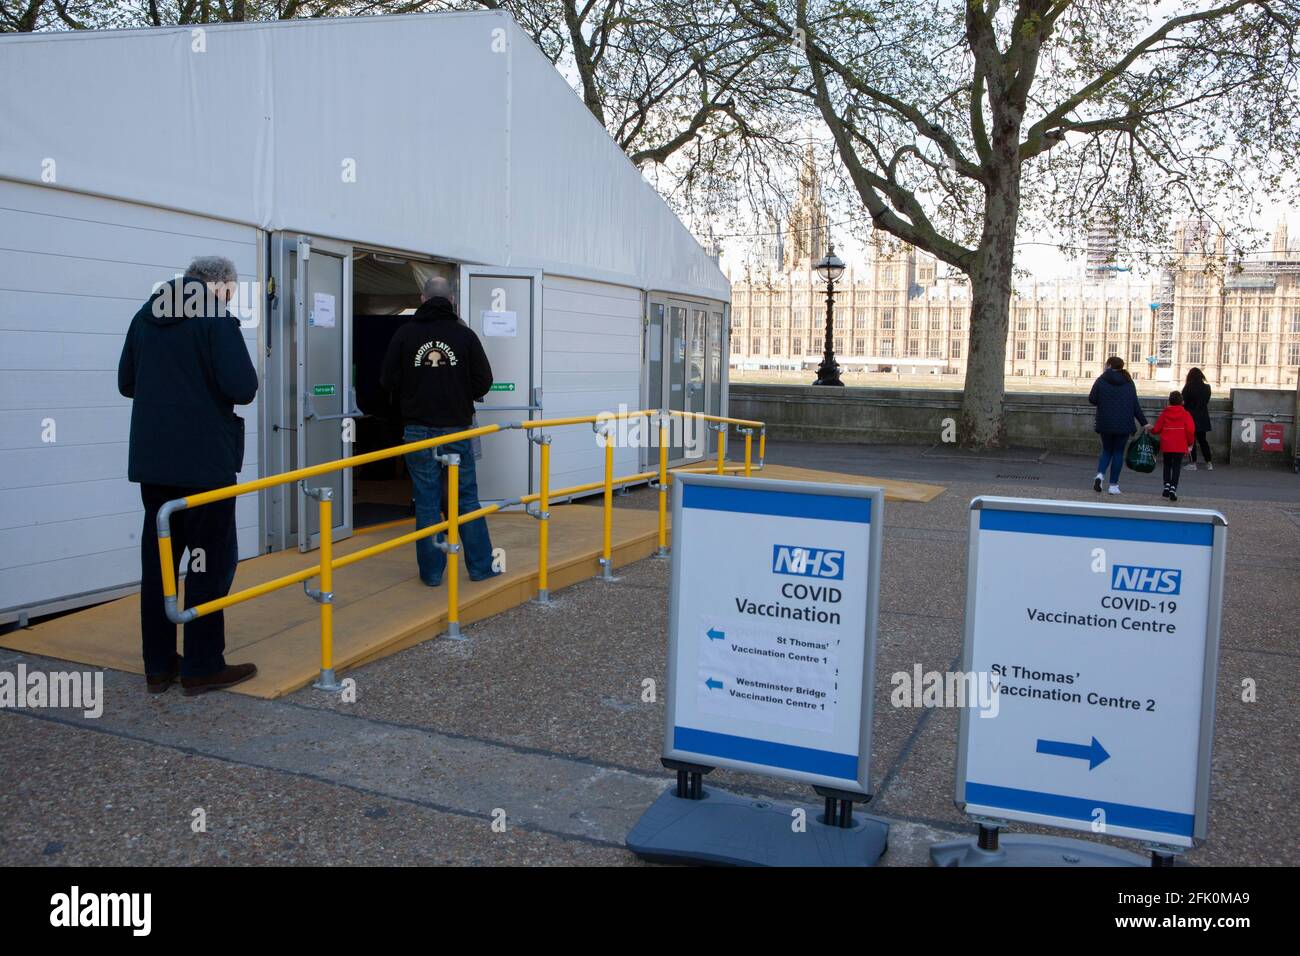 London, UK, 27 April 2021: people queue at the endtrance to a vaccination centre in the grounds of St Thomas's Hospital, facing the Houses of Parliament on the opposite bank of the River Thames. Prime Minister Boris Johnson still faces accusations of having preferred that 'bodies pile up' rather than have a third lockdown. Anna Watson/Alamy Live News Stock Photo